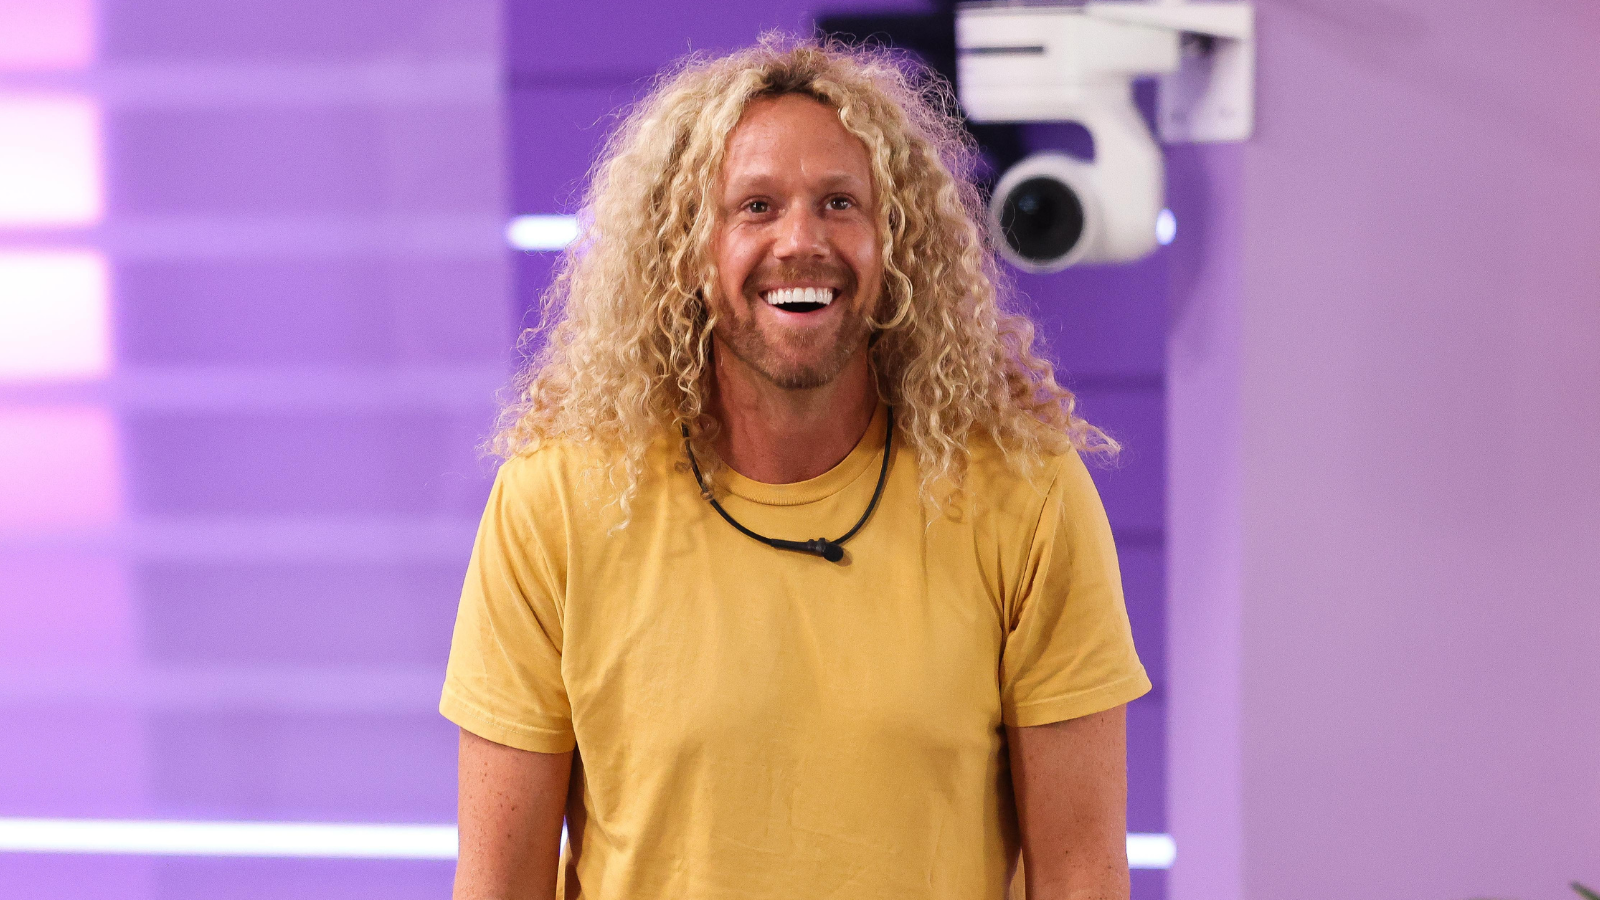 Big Brother's Tim Dormer On That Estelle Twitter Feud & His Tips For Future Contestants!